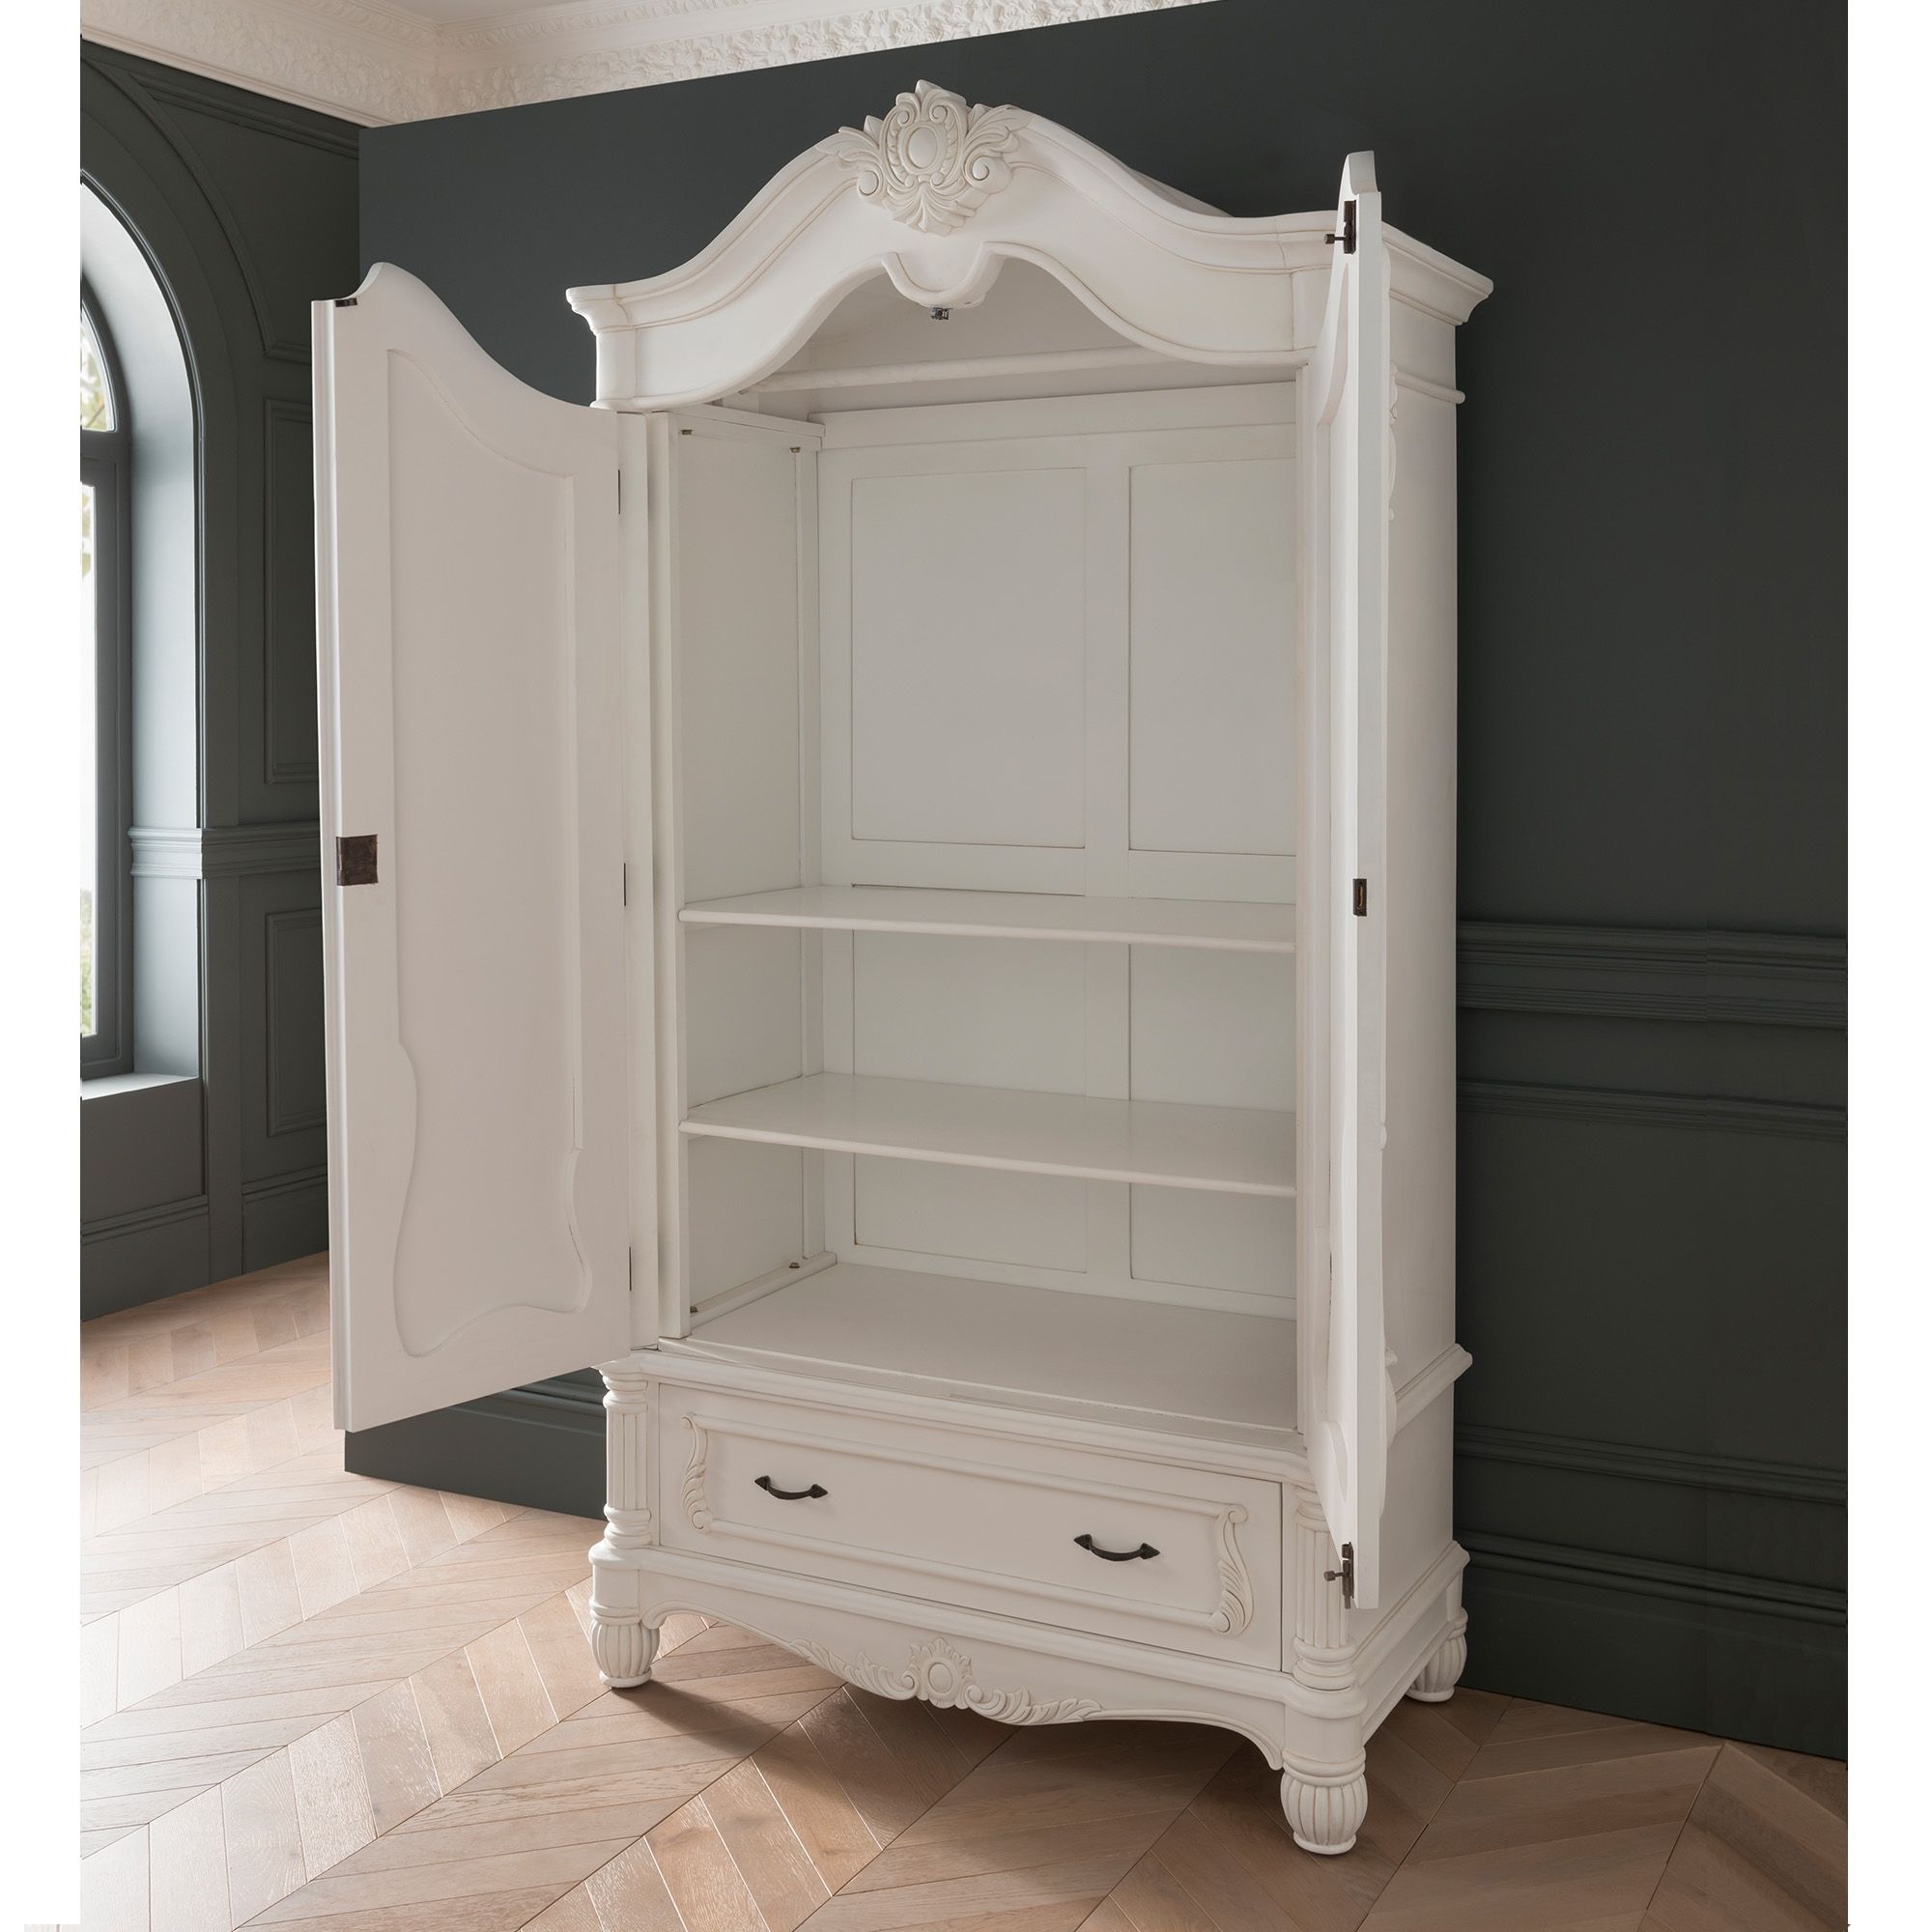 Antique French Style White Finished 1 Drawer Wardrobe | Homesdirect365 Throughout Shabby Chic White Wardrobes (View 3 of 15)